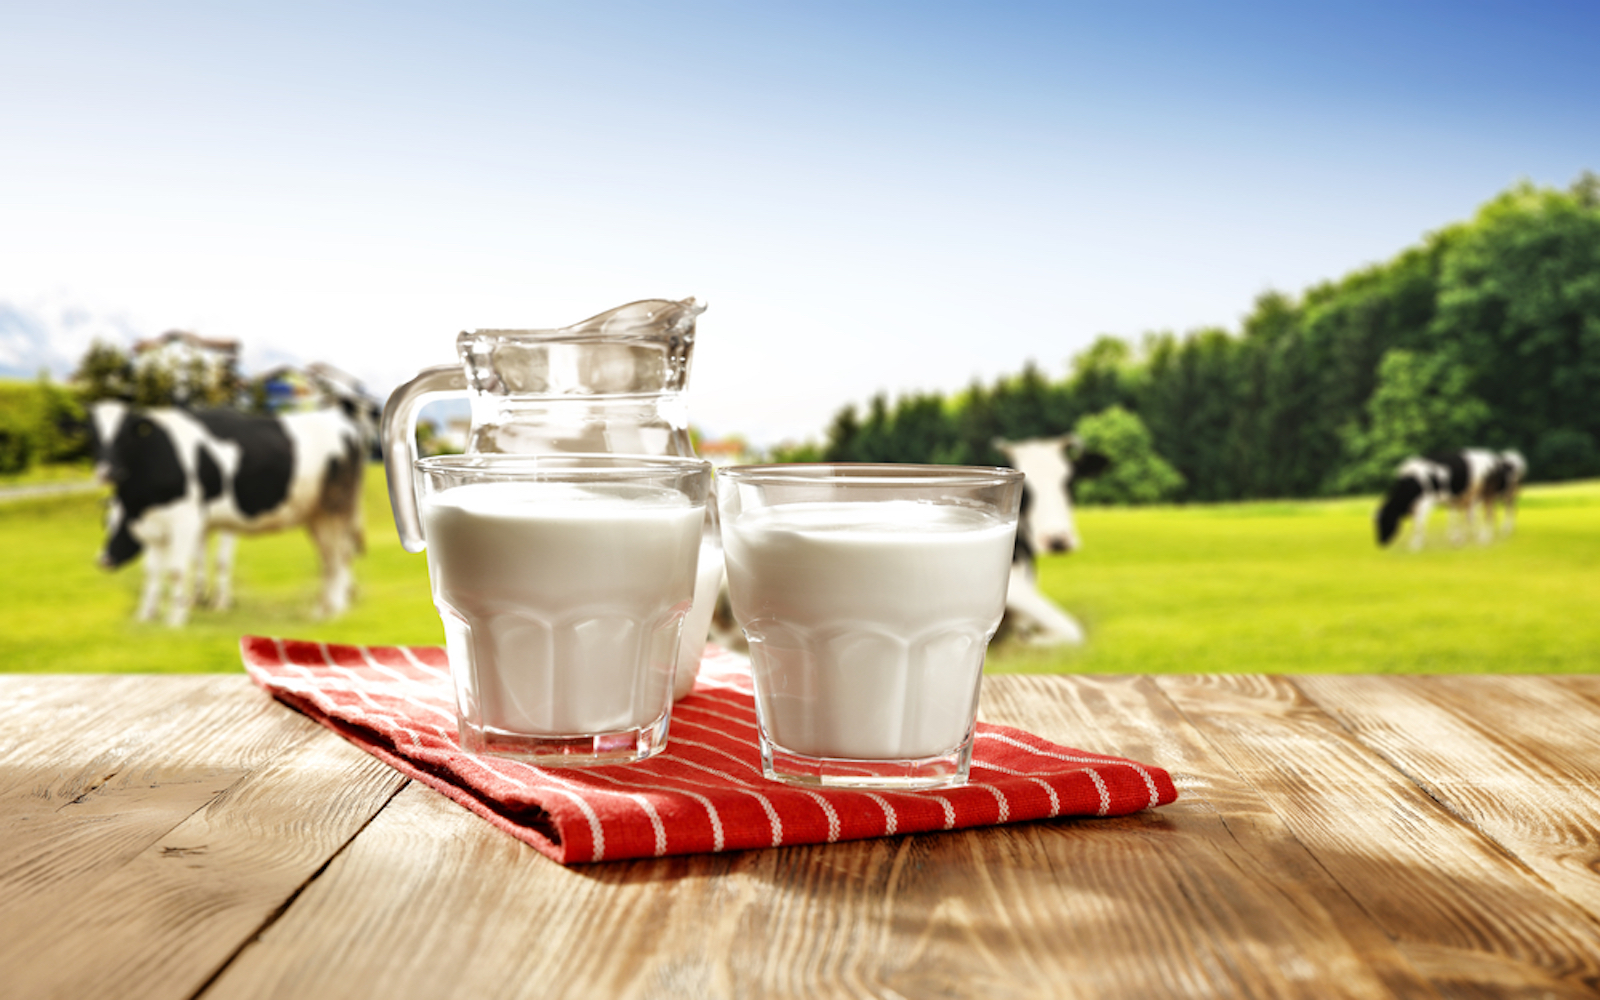 Cow's milk is nutritious but also high in fat